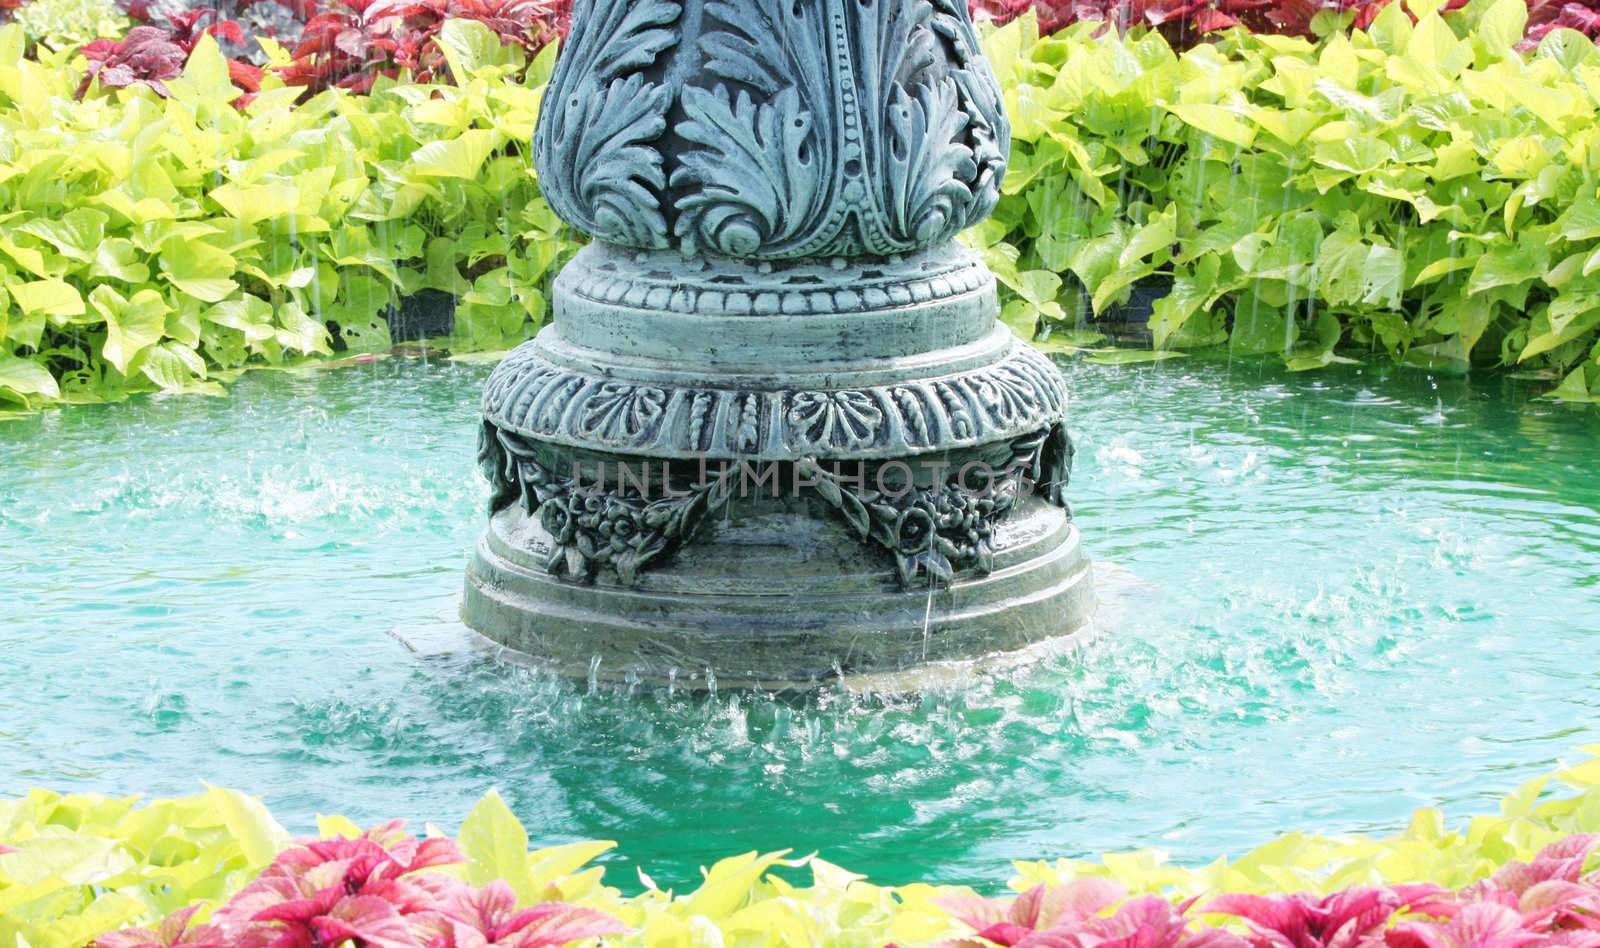 Beautiful and colorful water fountain surounded by plants